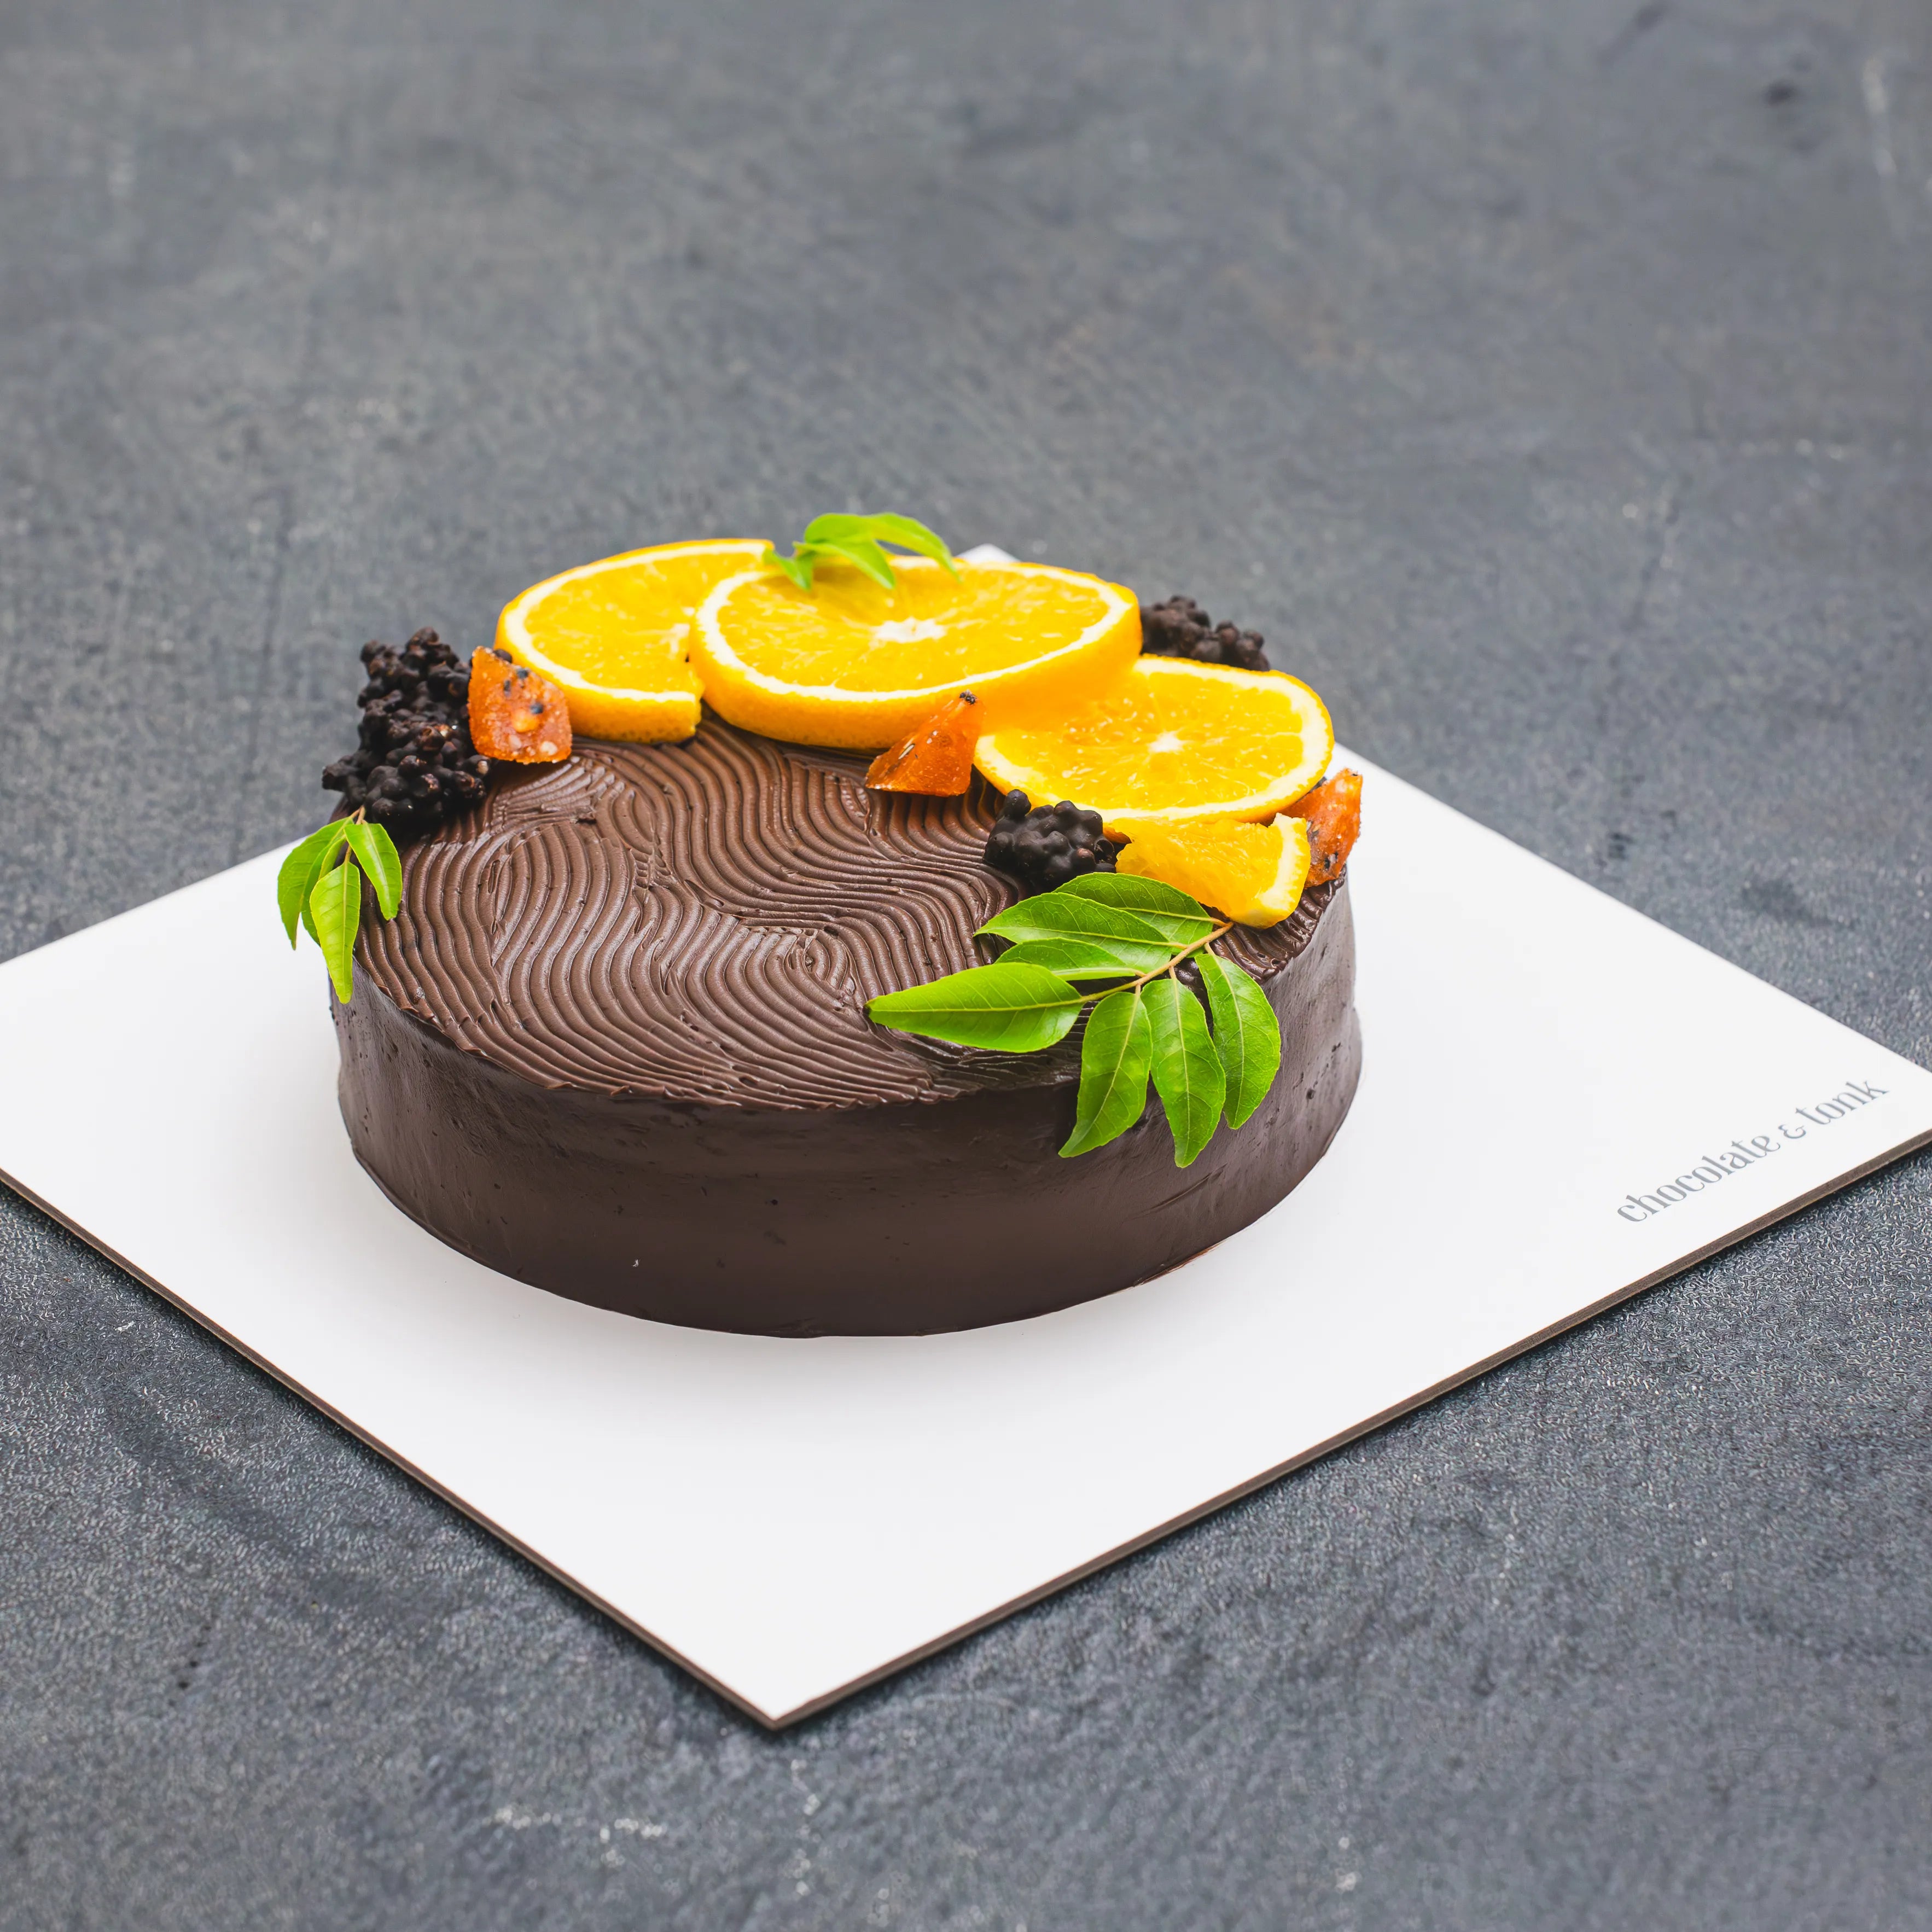 Vibrant orange chocolate cake infused with alcohol for an extra kick